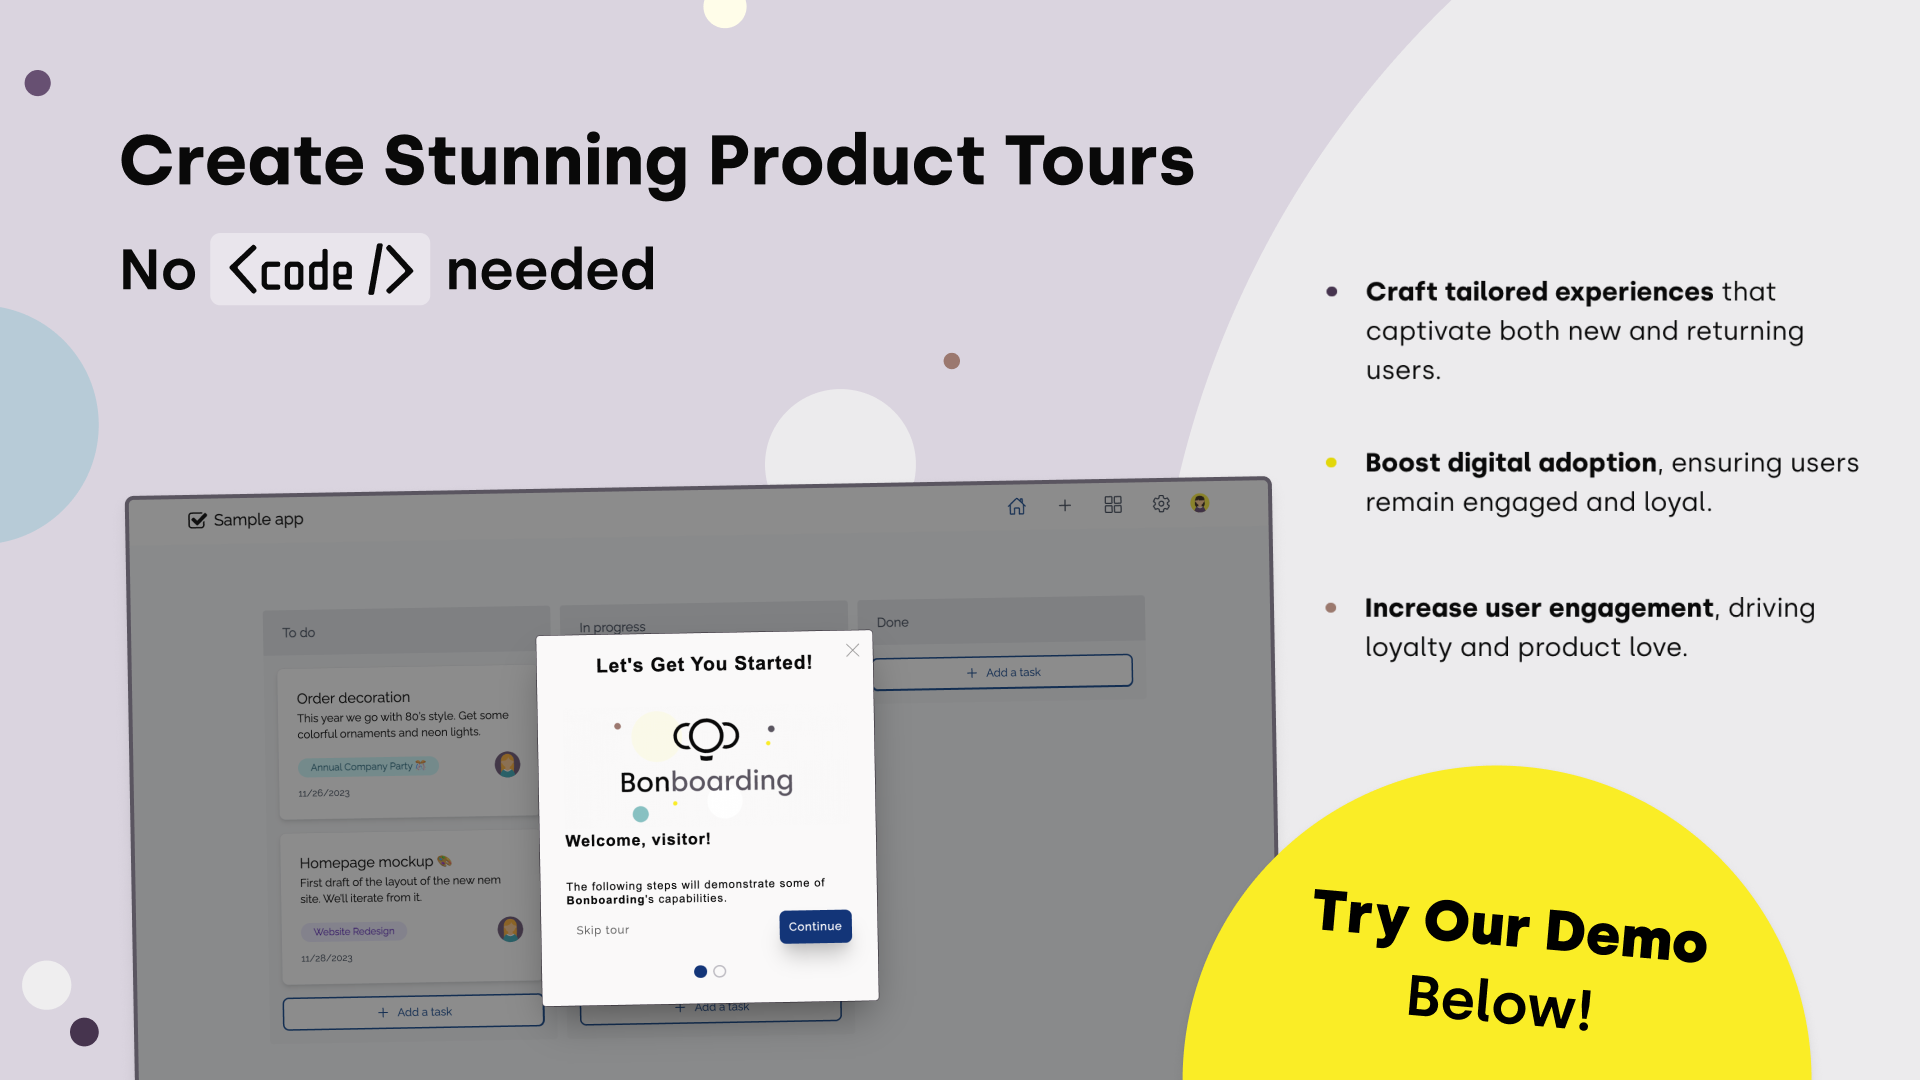 No-code product tours